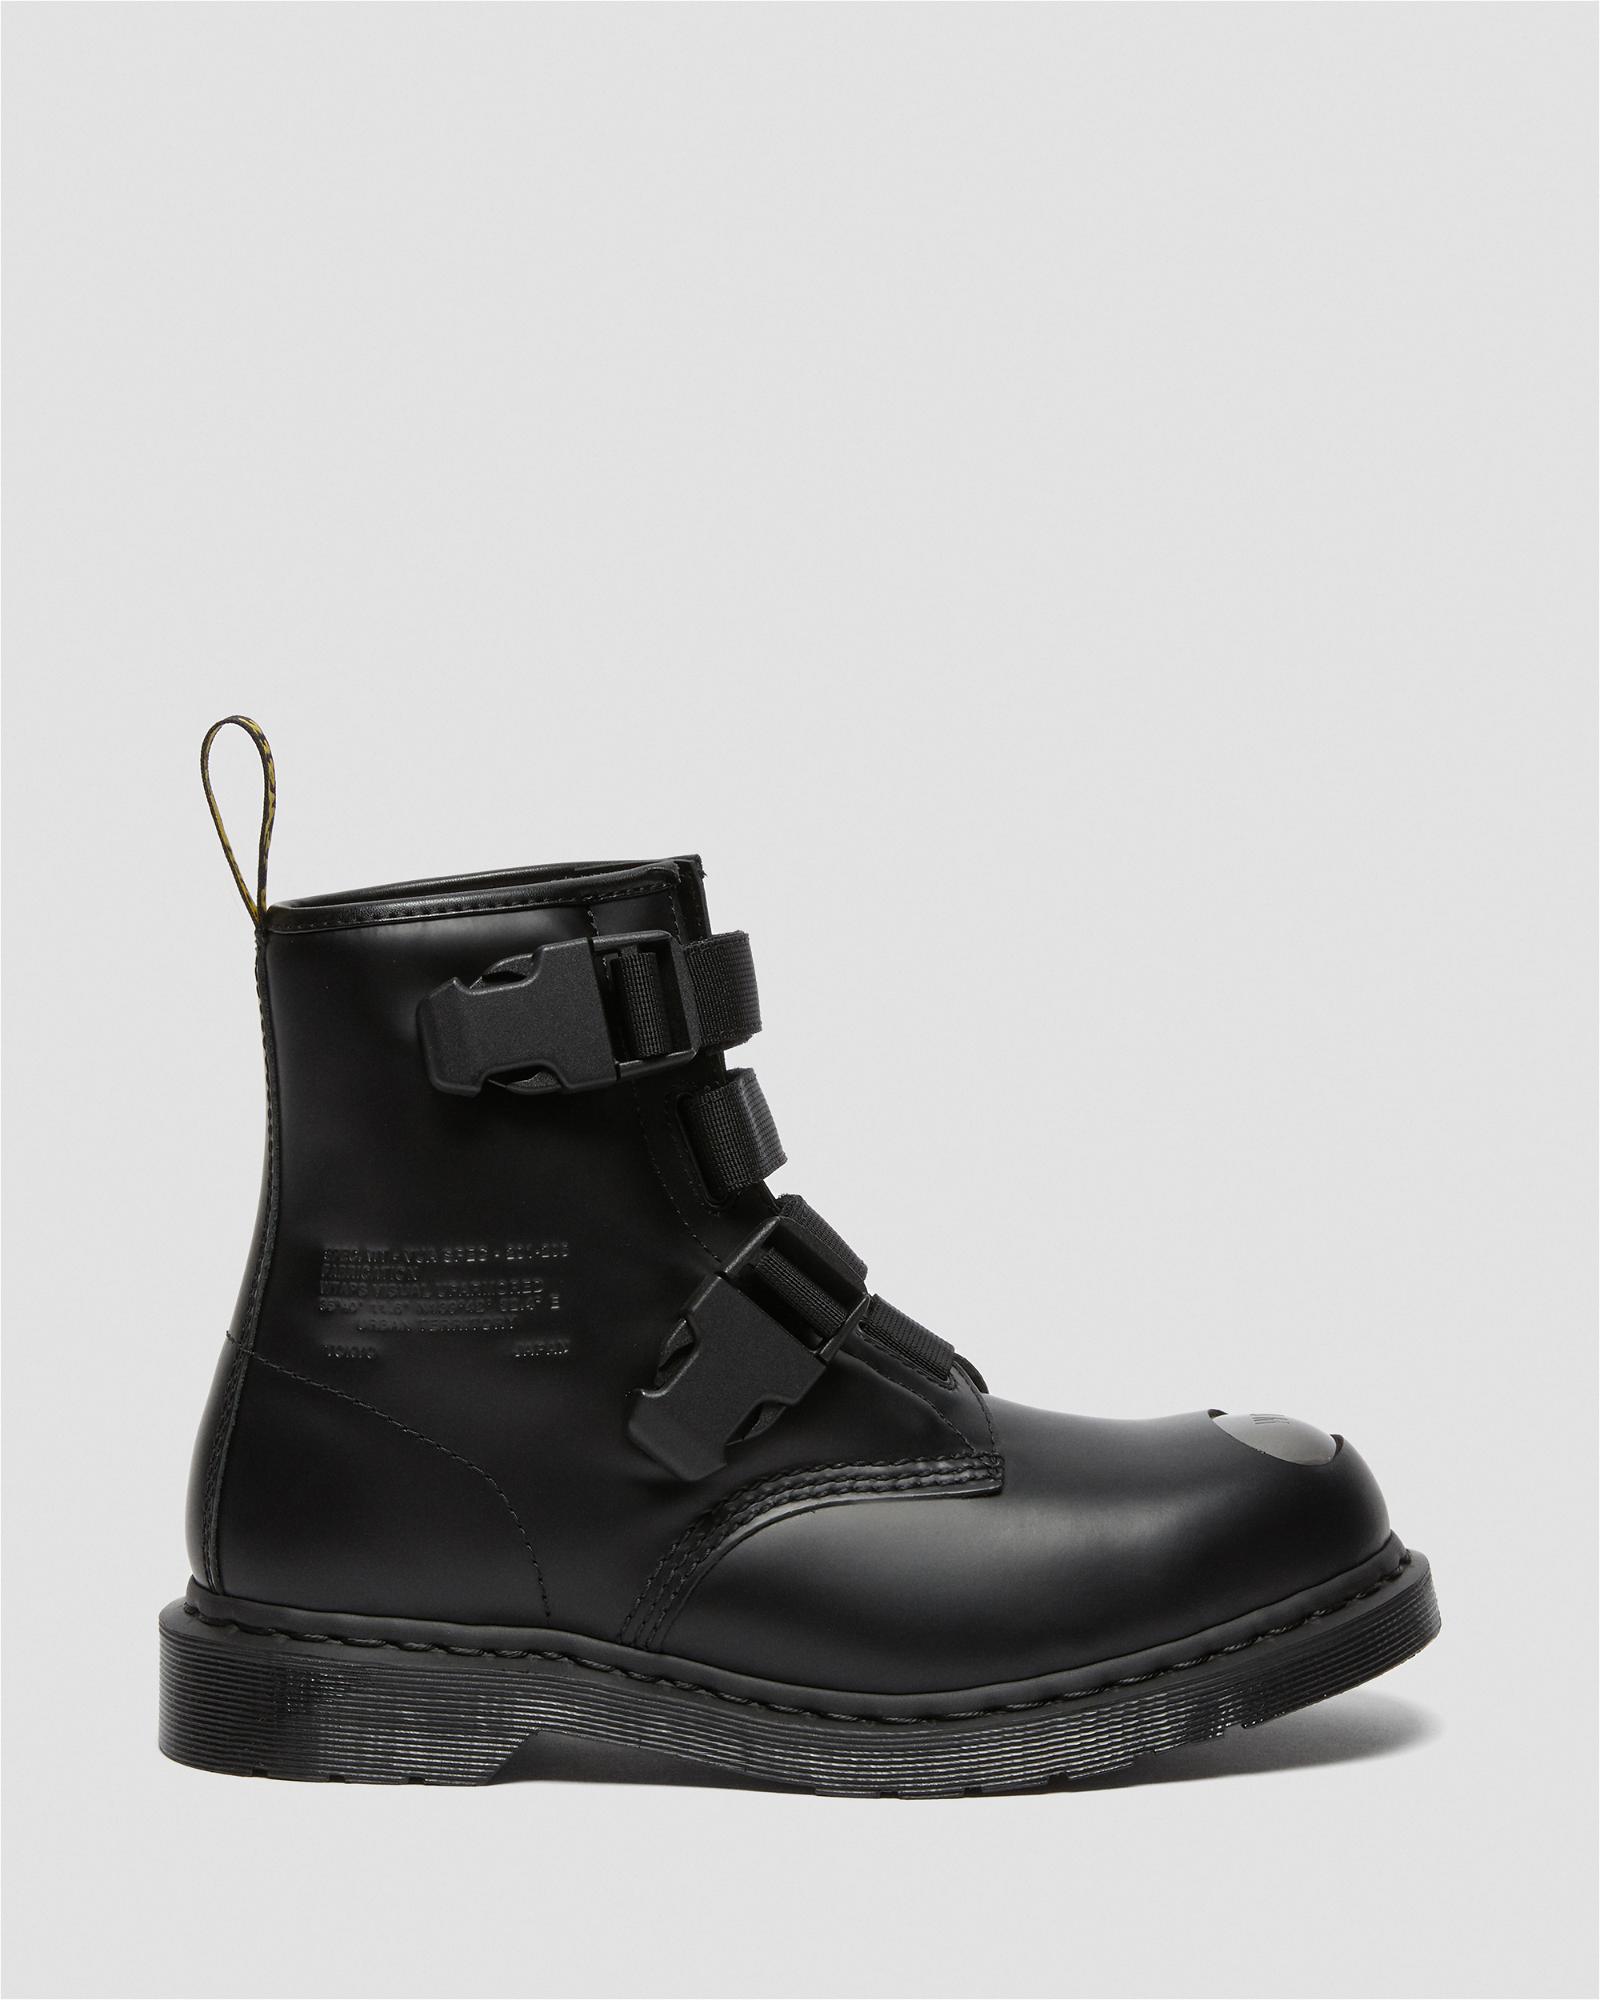 Dr. Martens x WTAPS 1460 Remastered